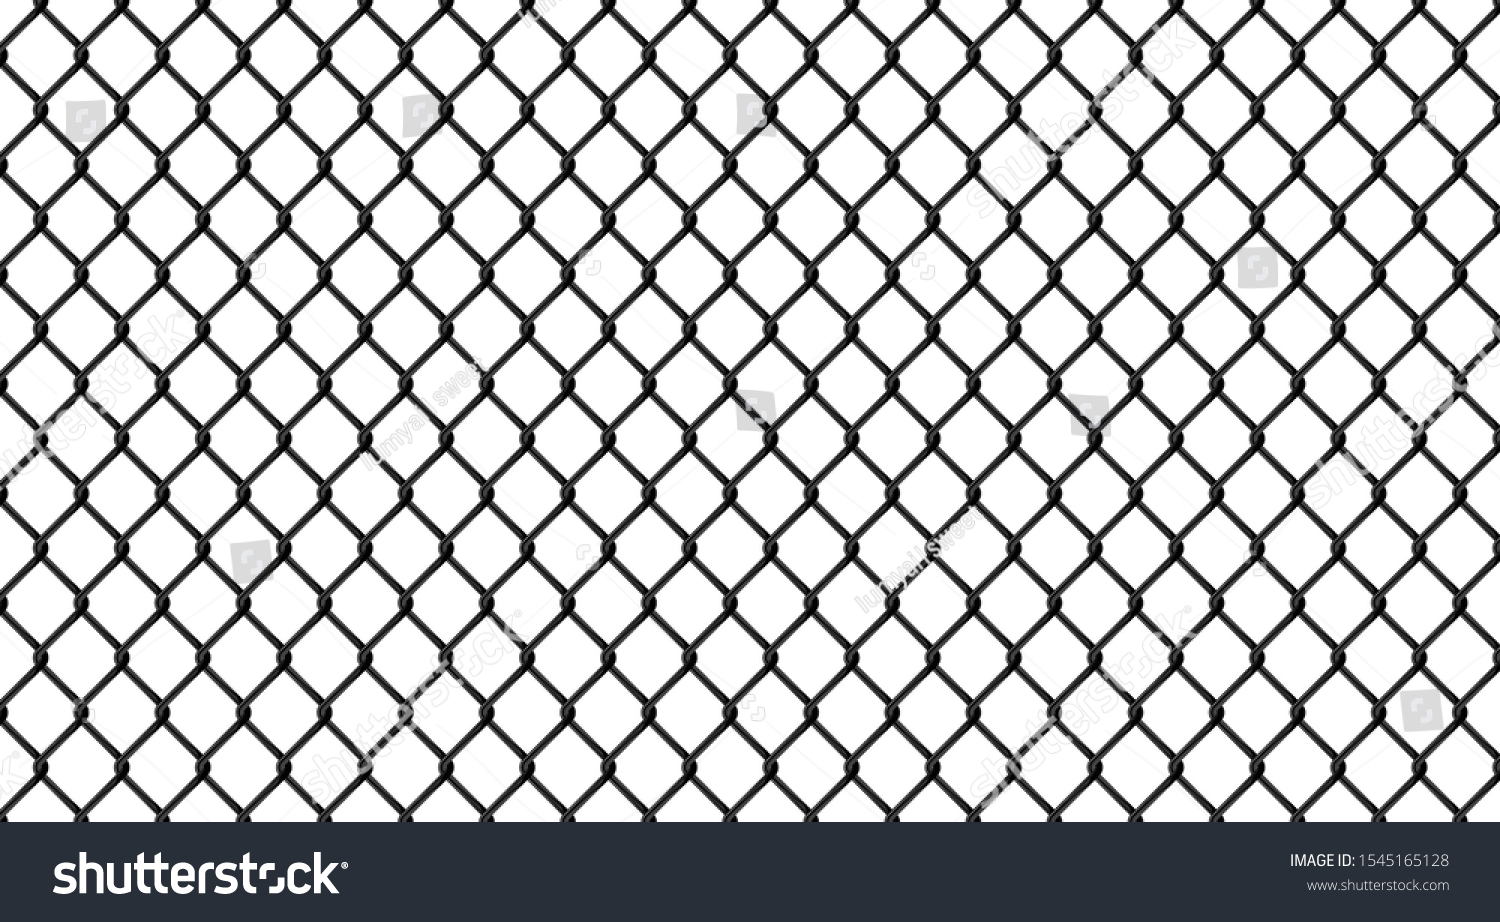 Black chrome Steel Grating seamless structure. Chainlink isolated on white background. Vector illustration. EPS 10. #1545165128